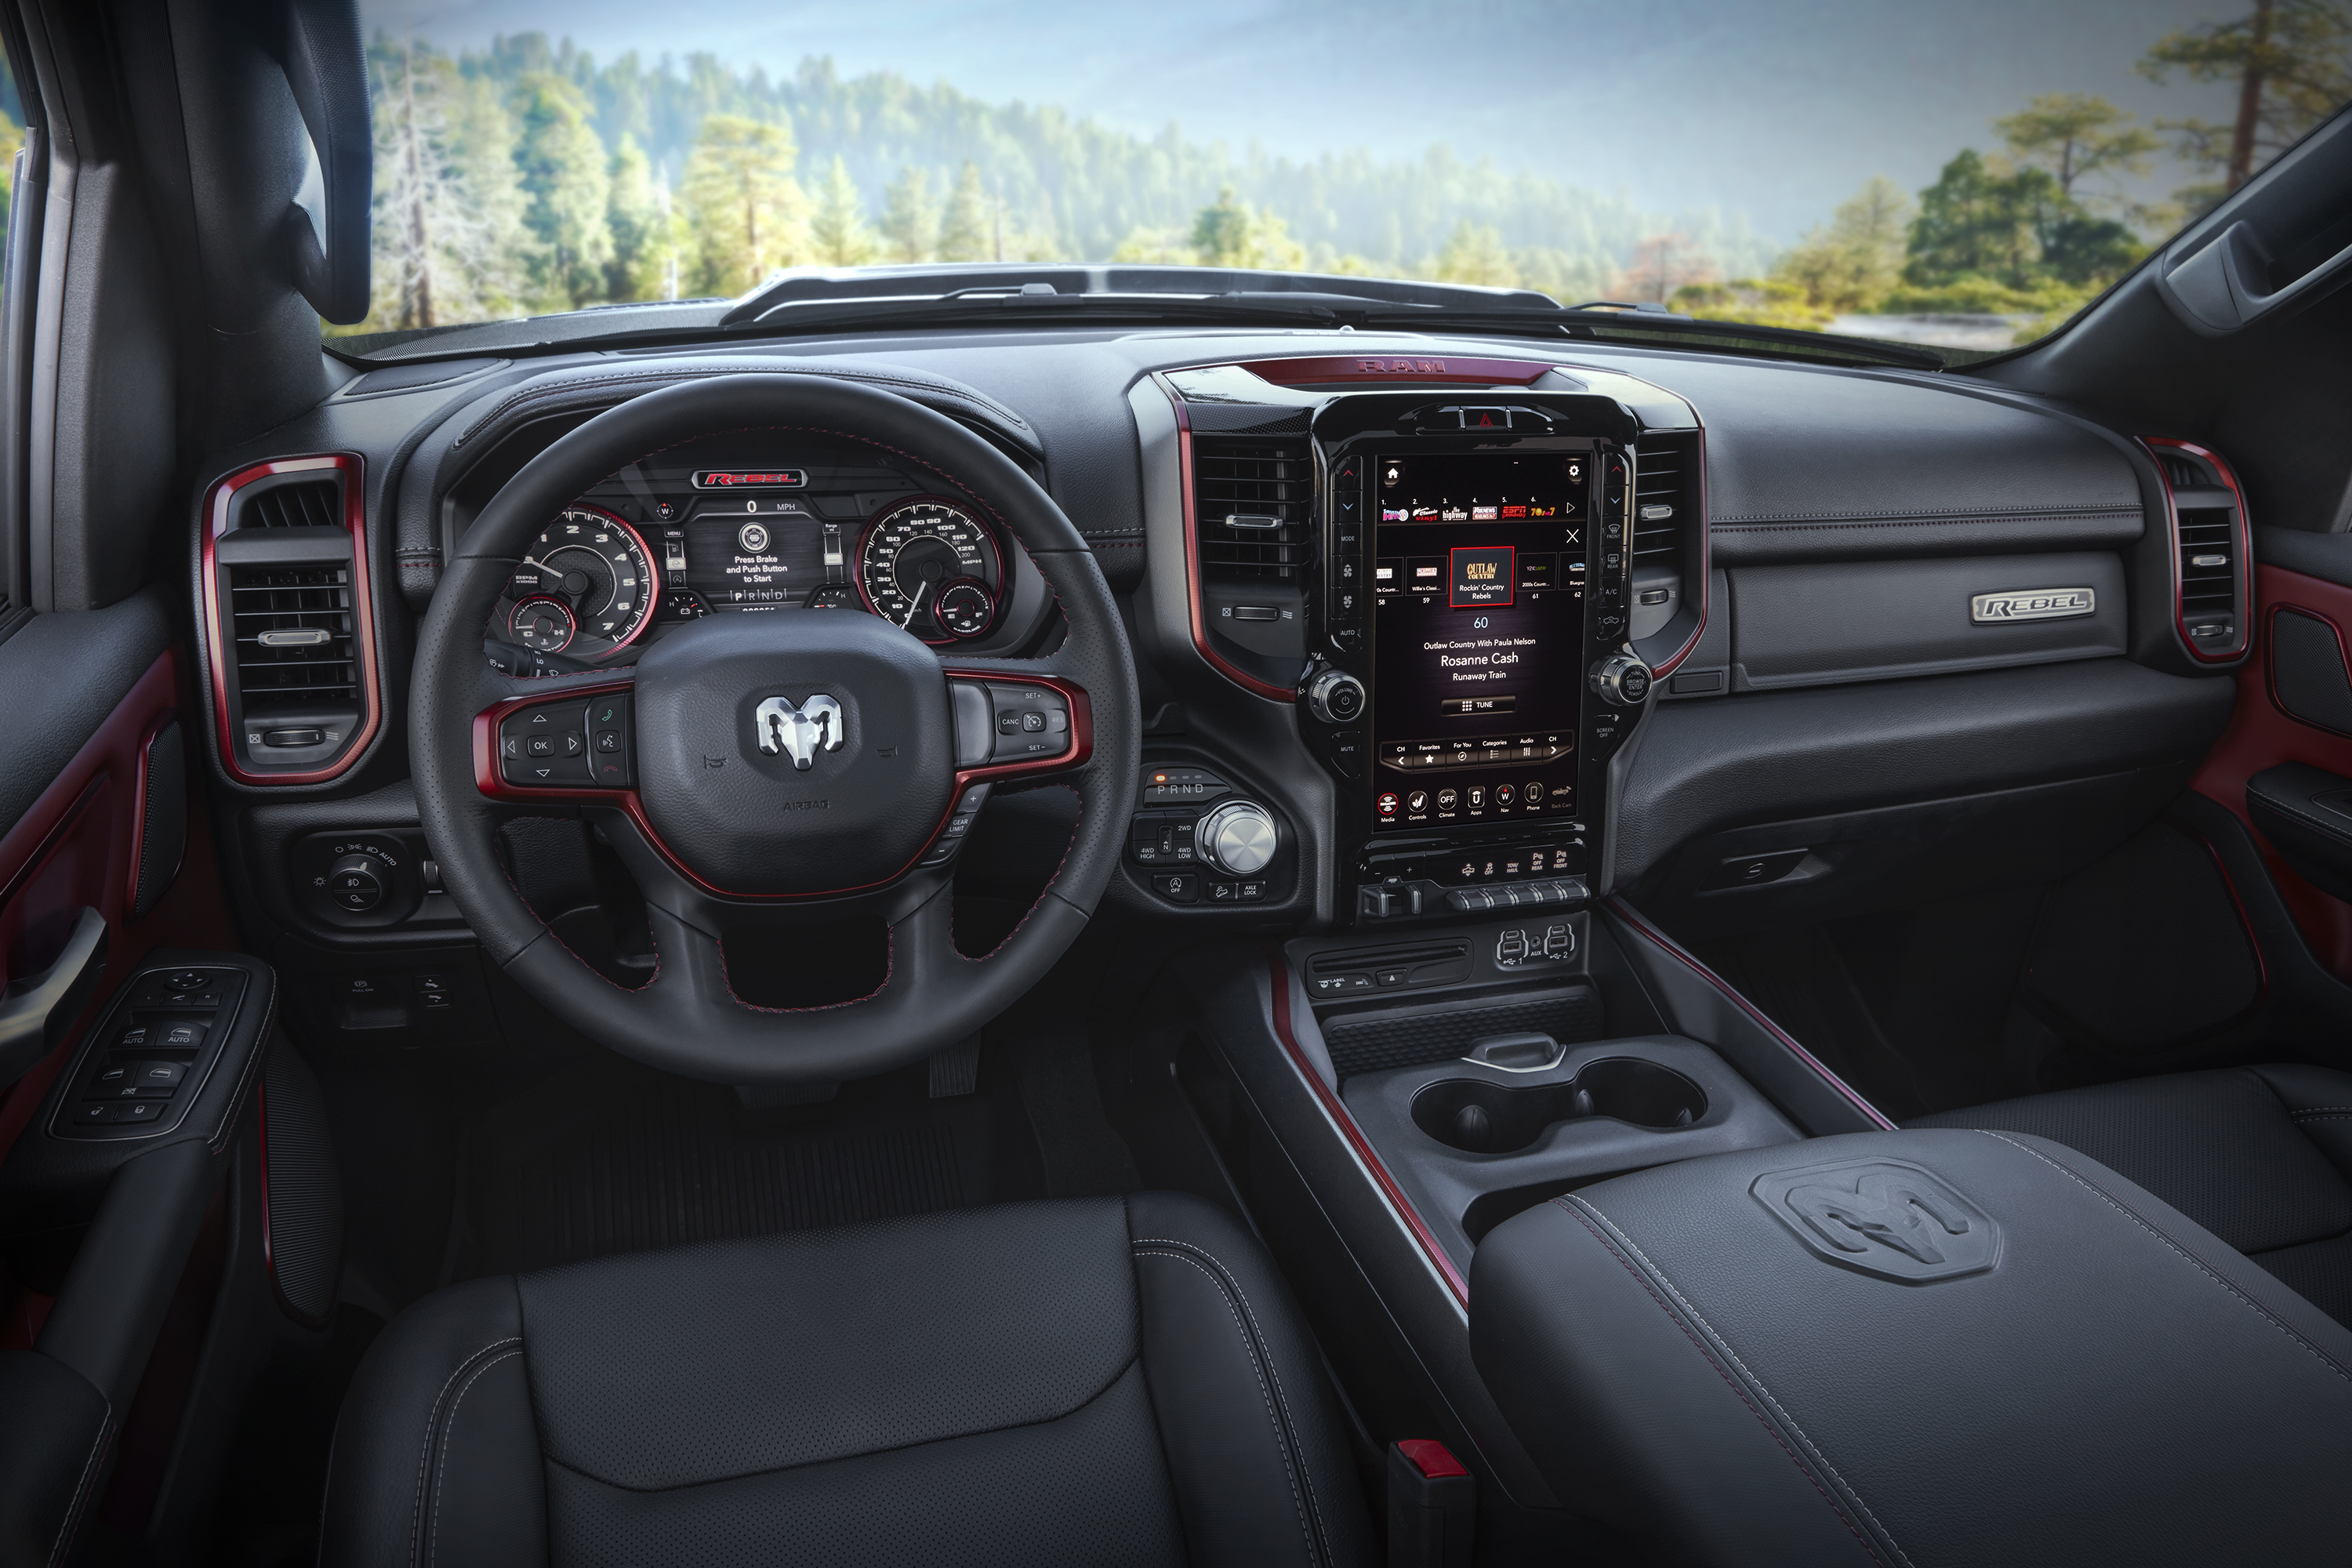 You’ll want to see the interior of the new 2019 Ram 1500 Rebel 12